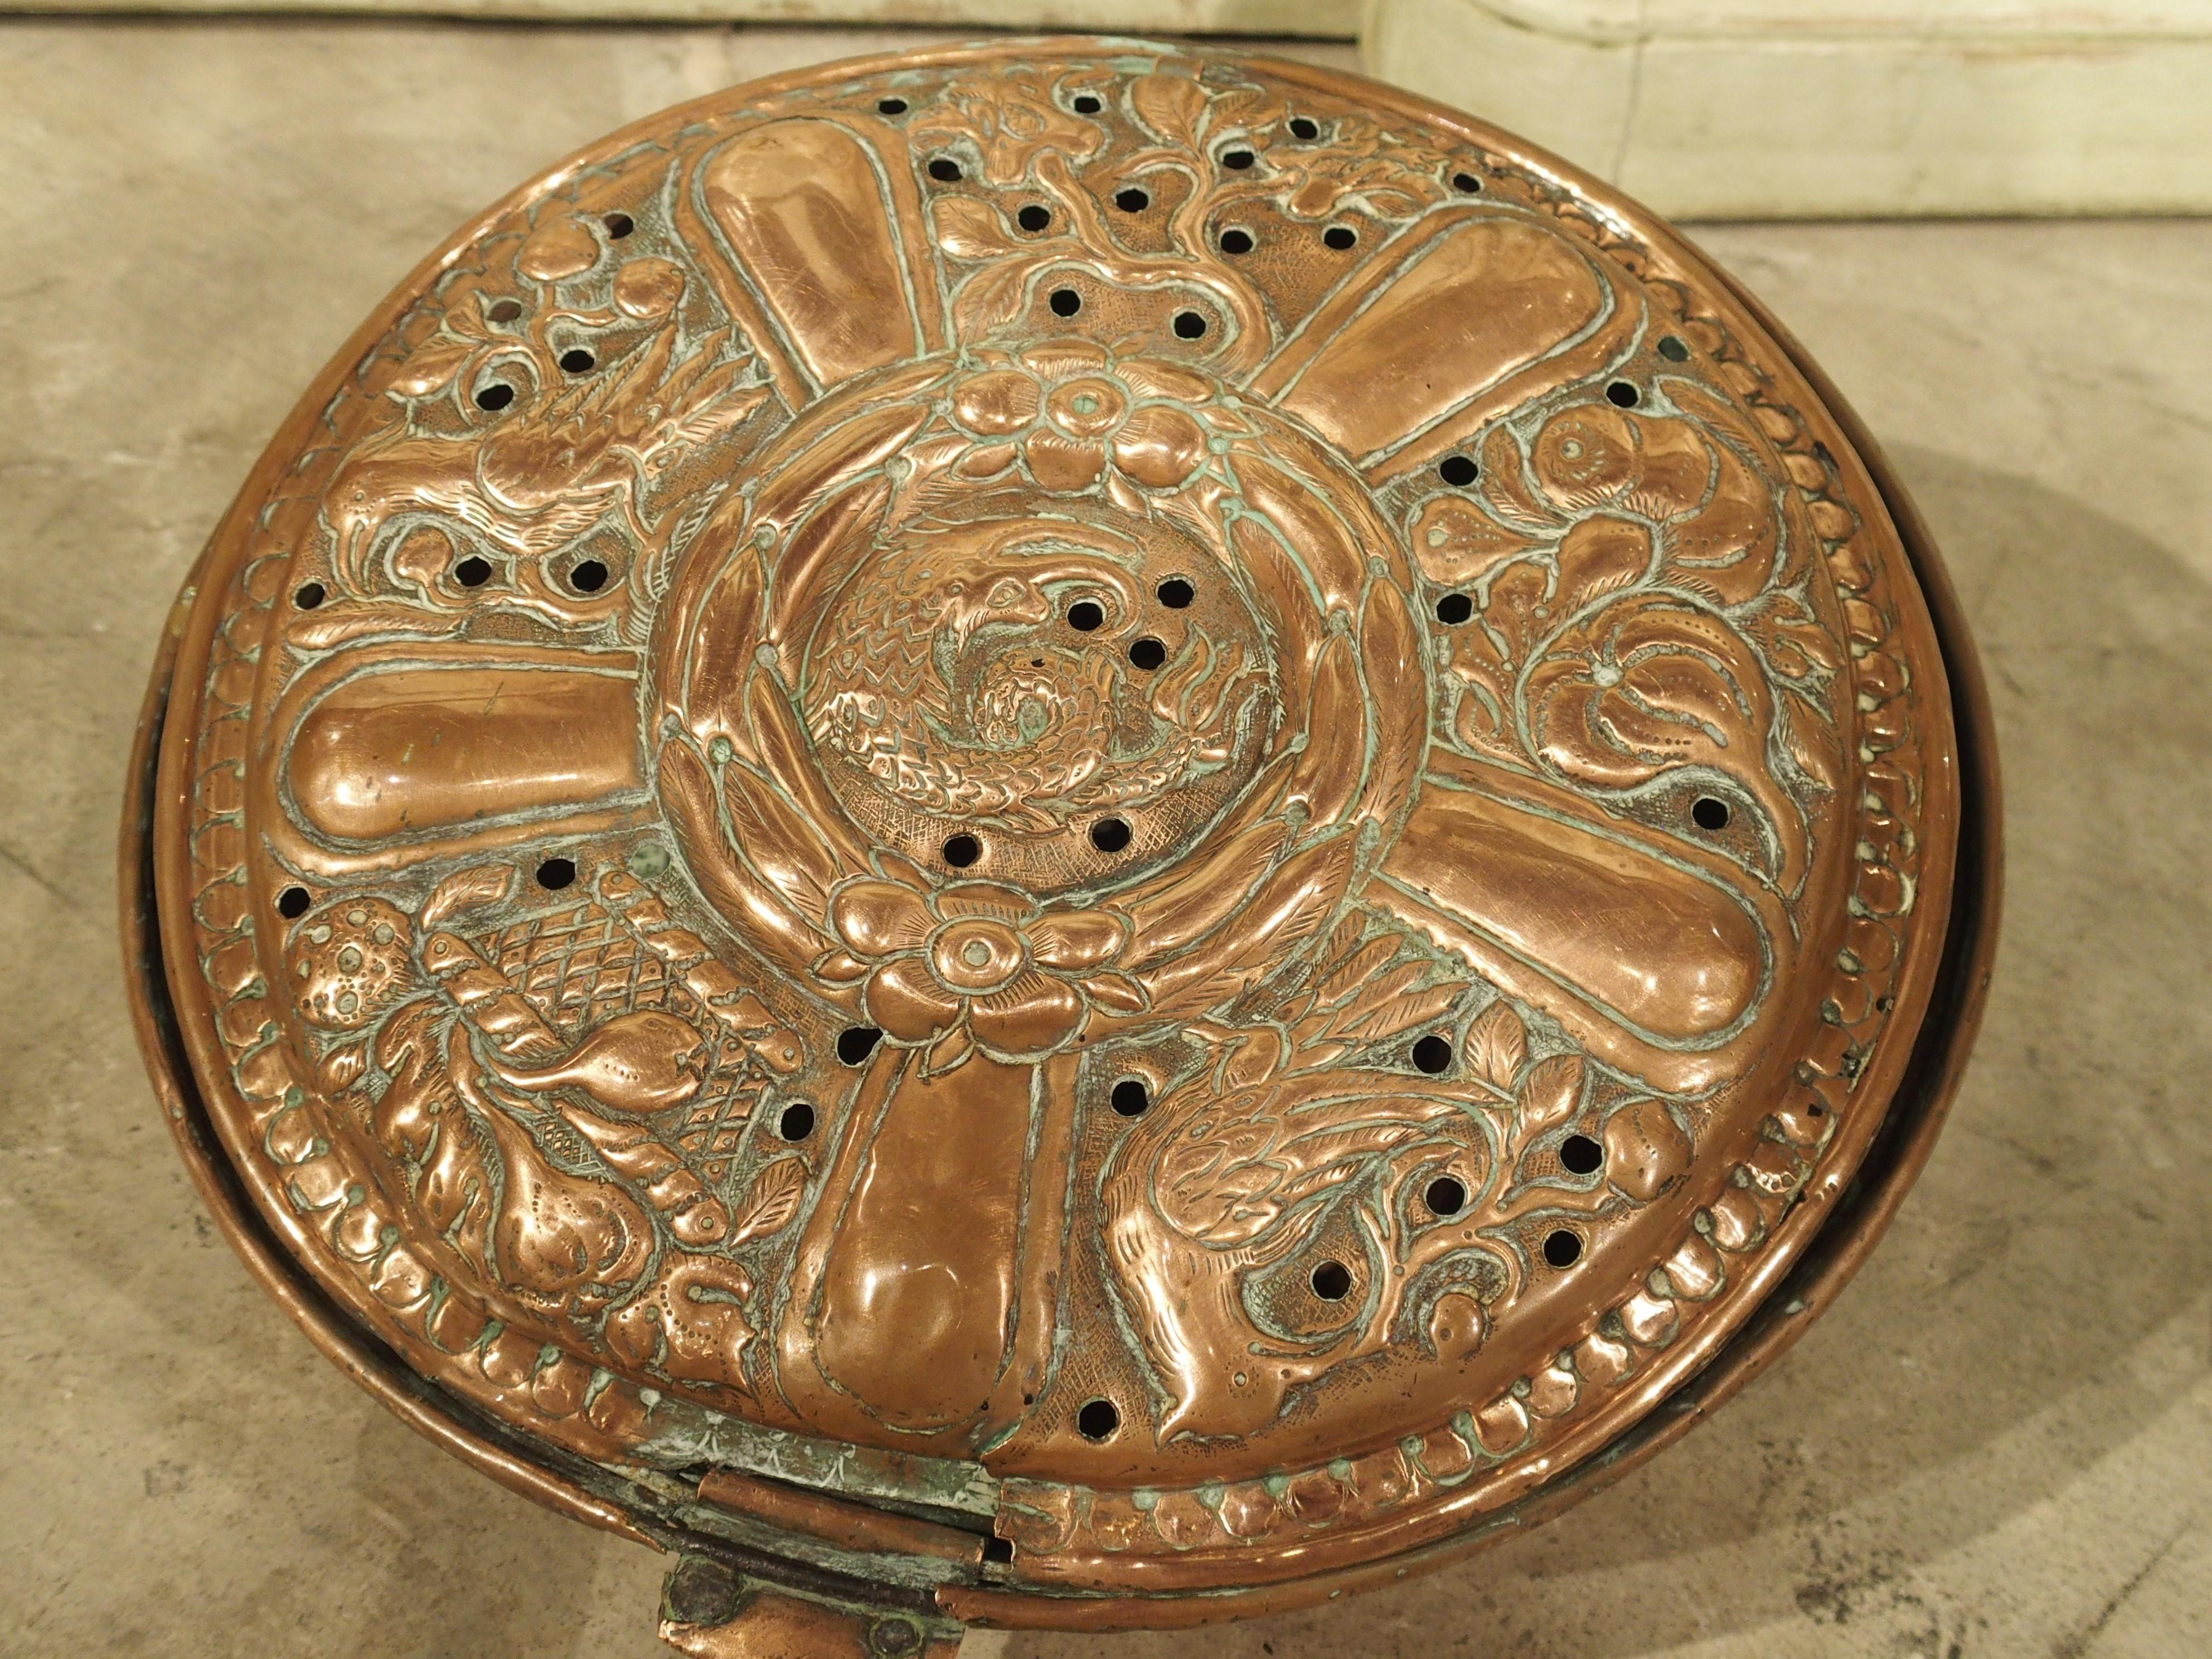 Hand-Carved 18th Century French Copper Bassinoire Bed Warmer For Sale